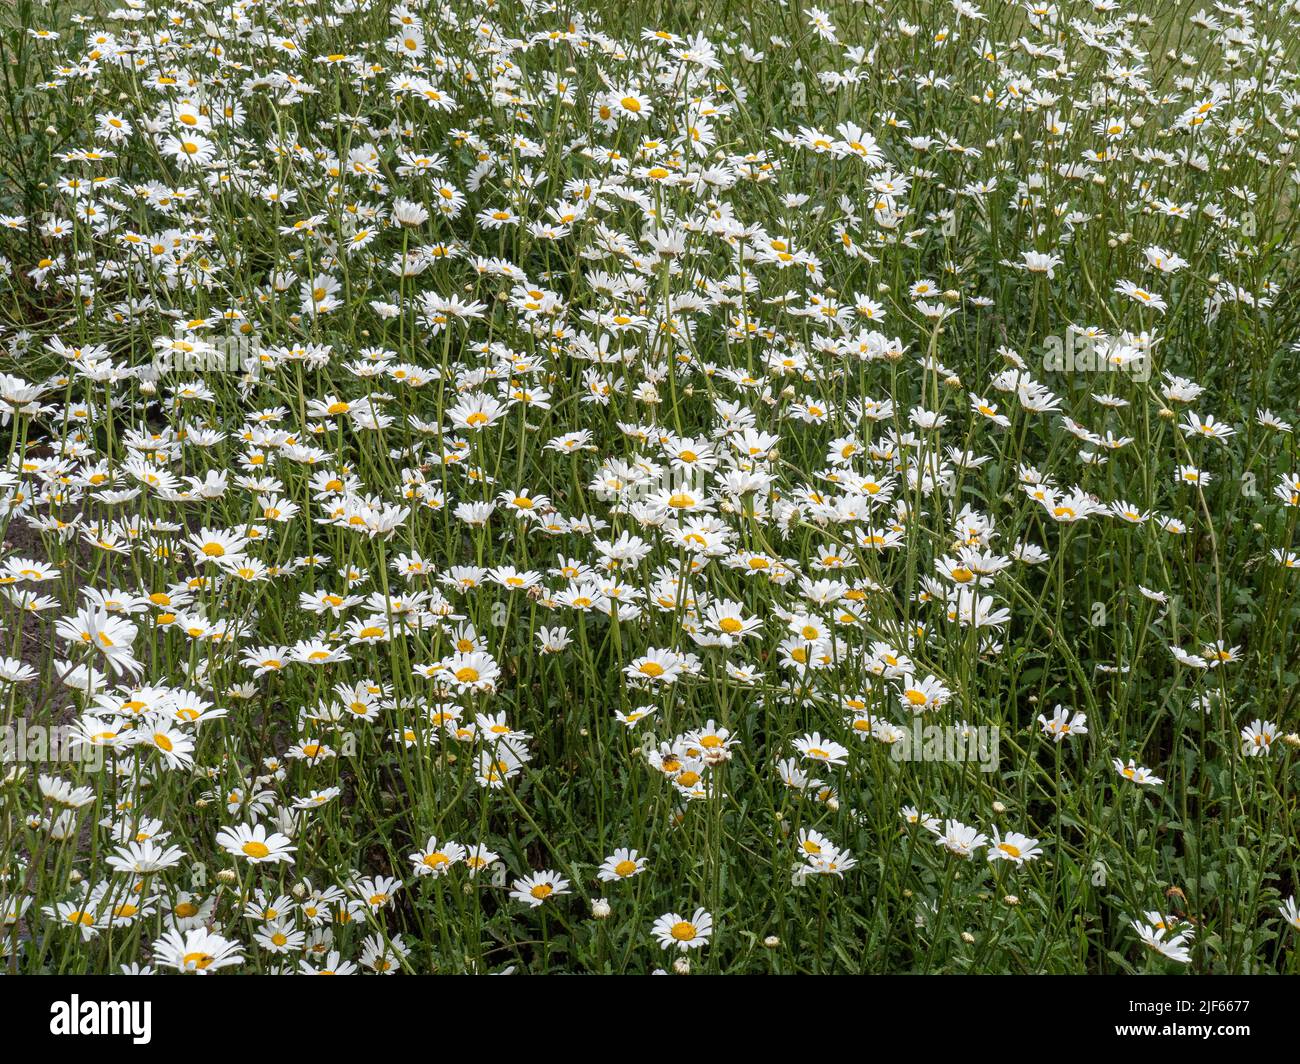 A large area of the popular white and yellow ox-eye daisy Leucanthemum vulgare on the edge of a wildlife area Stock Photo